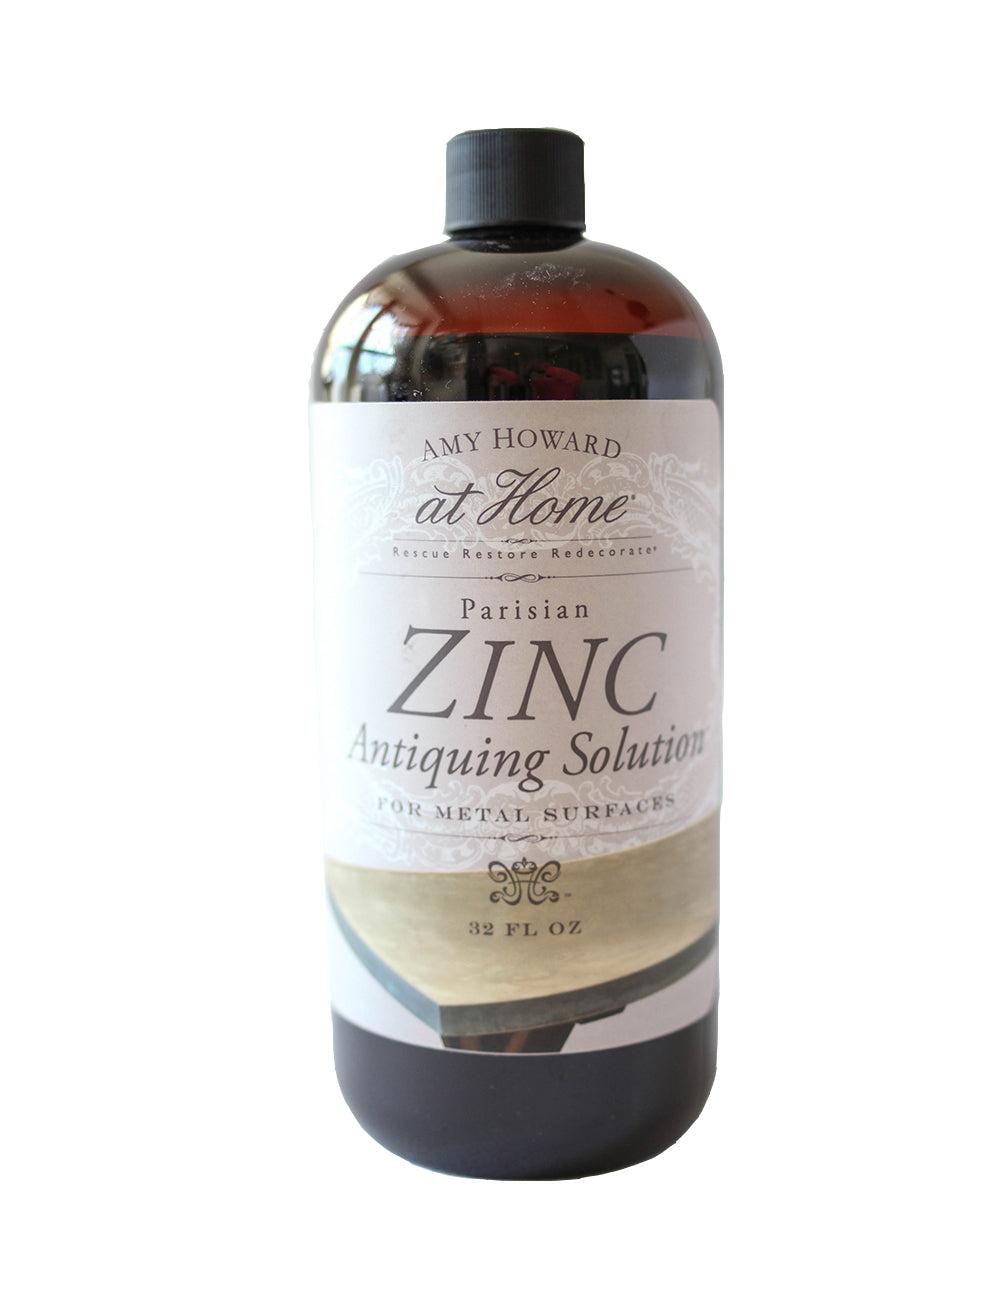 Zinc Antiquing Solution Amy Howard At Home